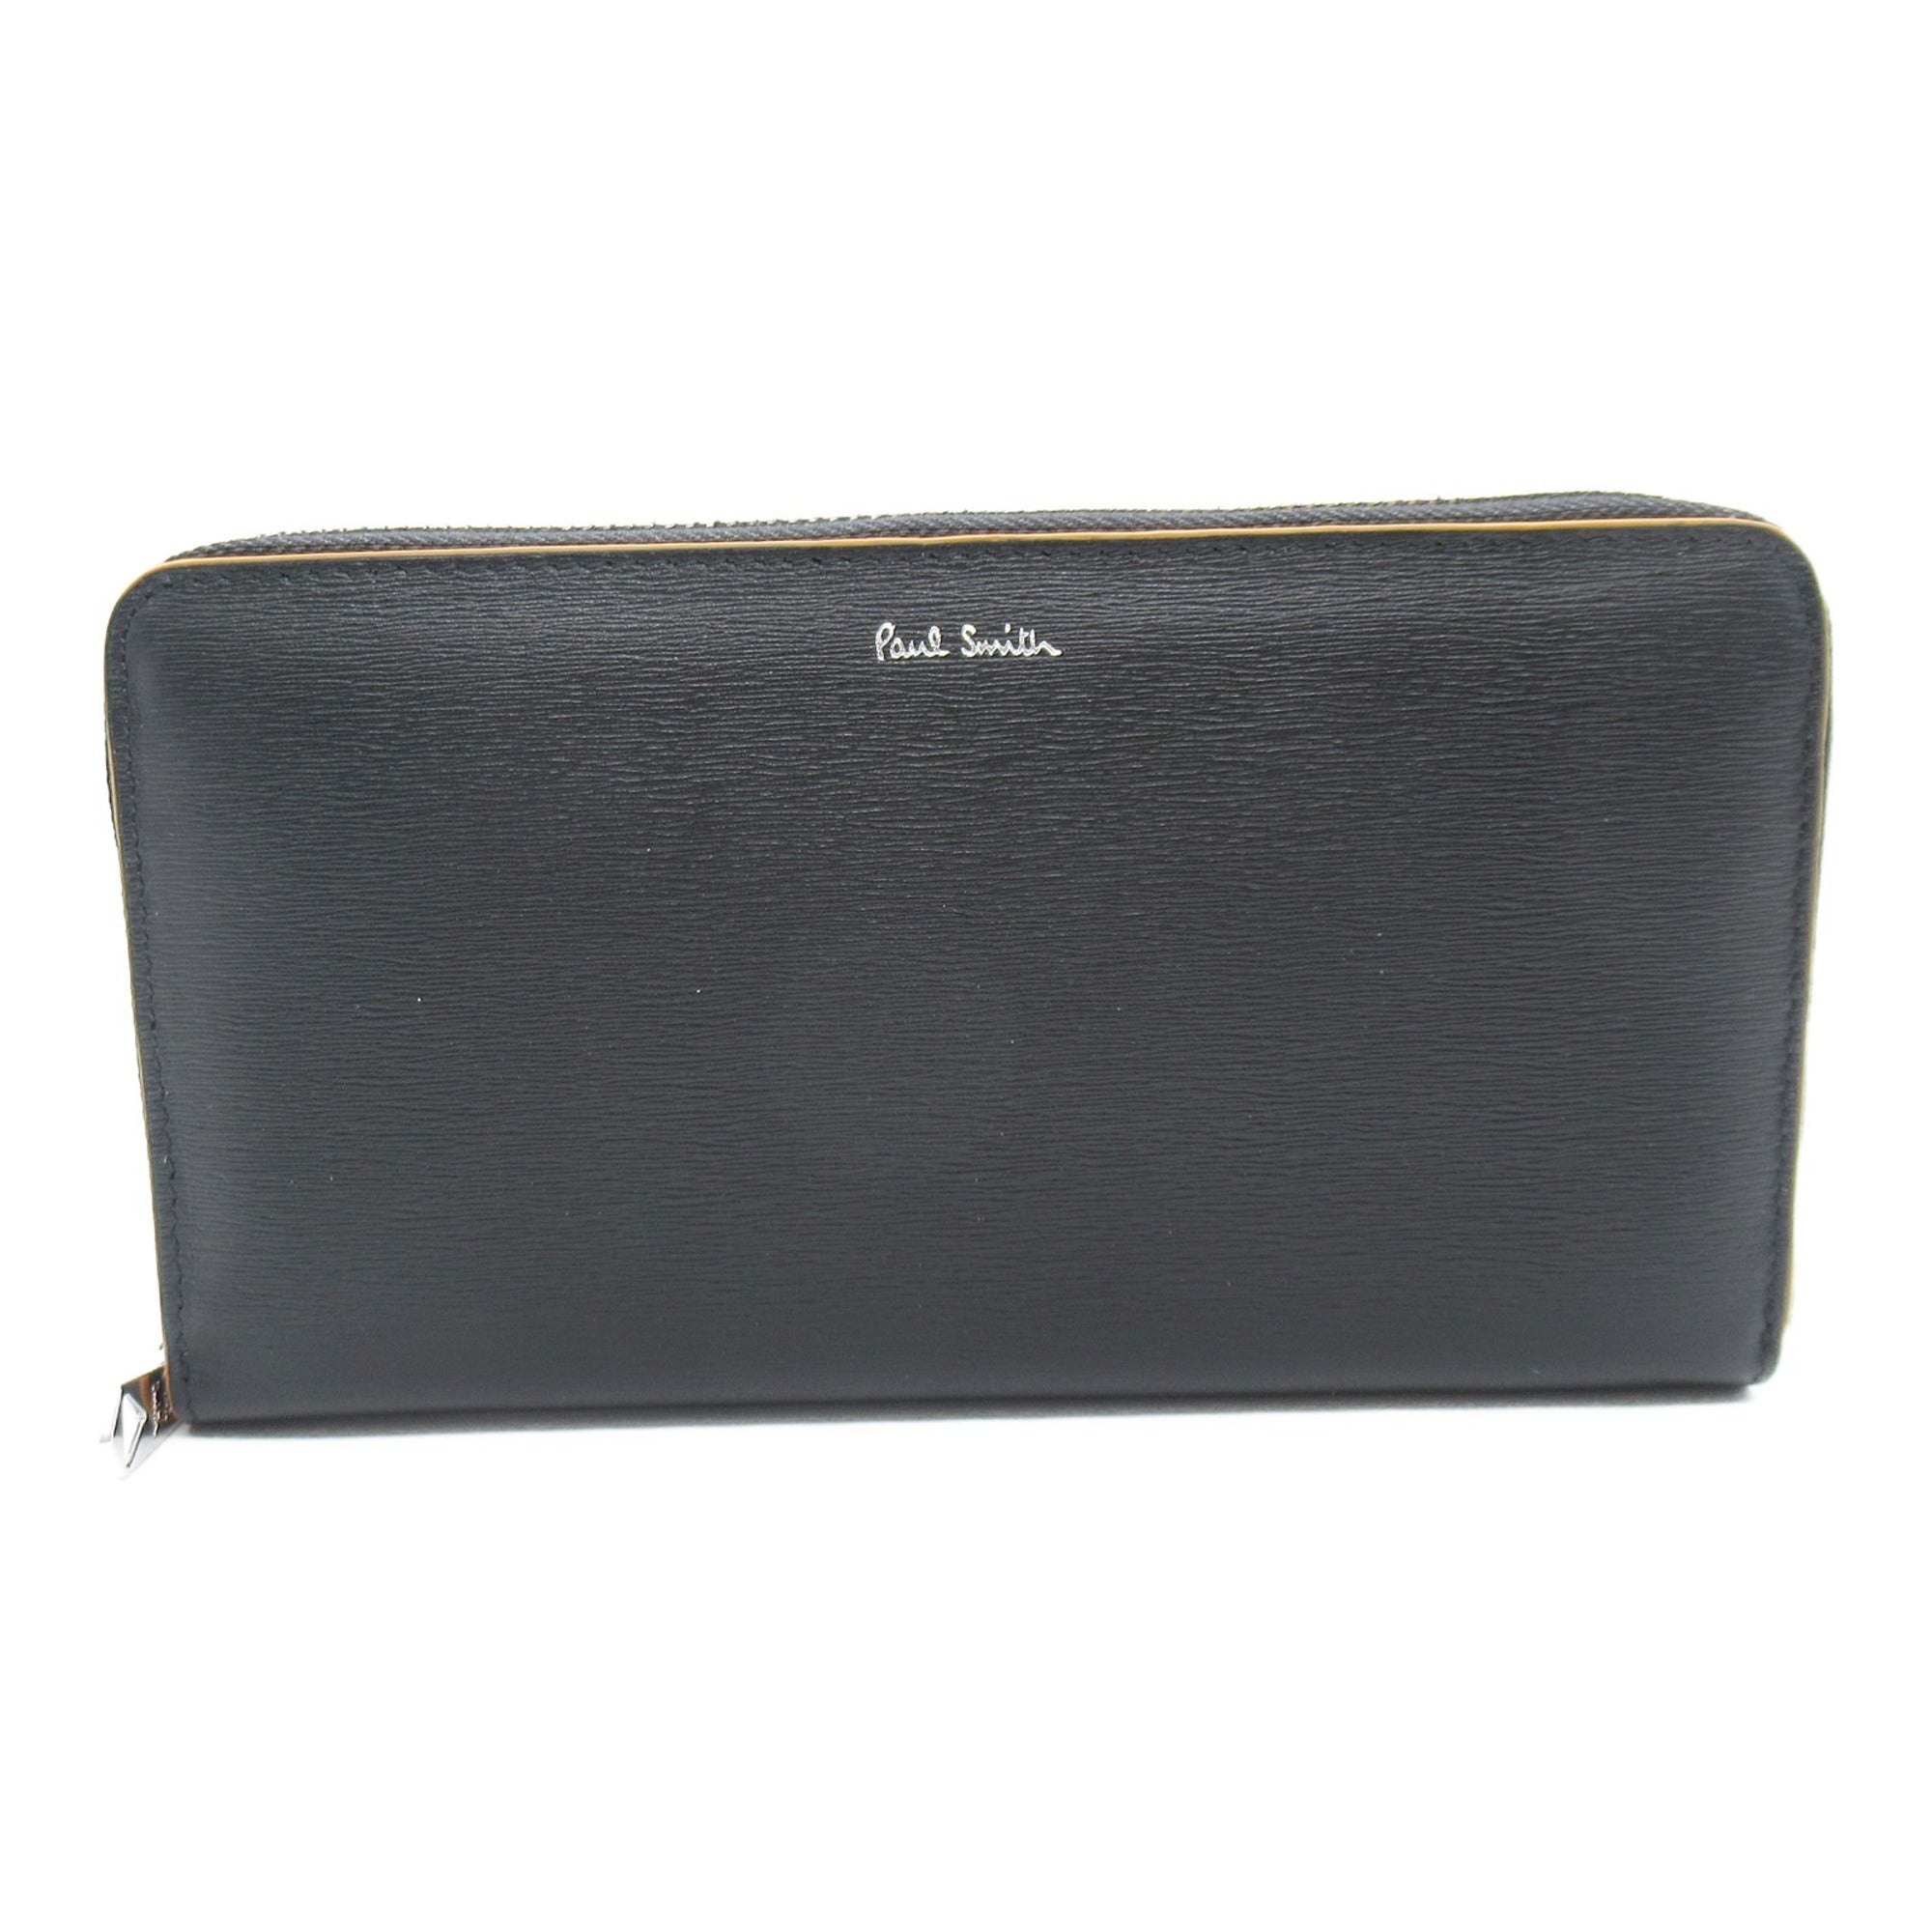 Round Long Wallet Black Leather 4778X78A